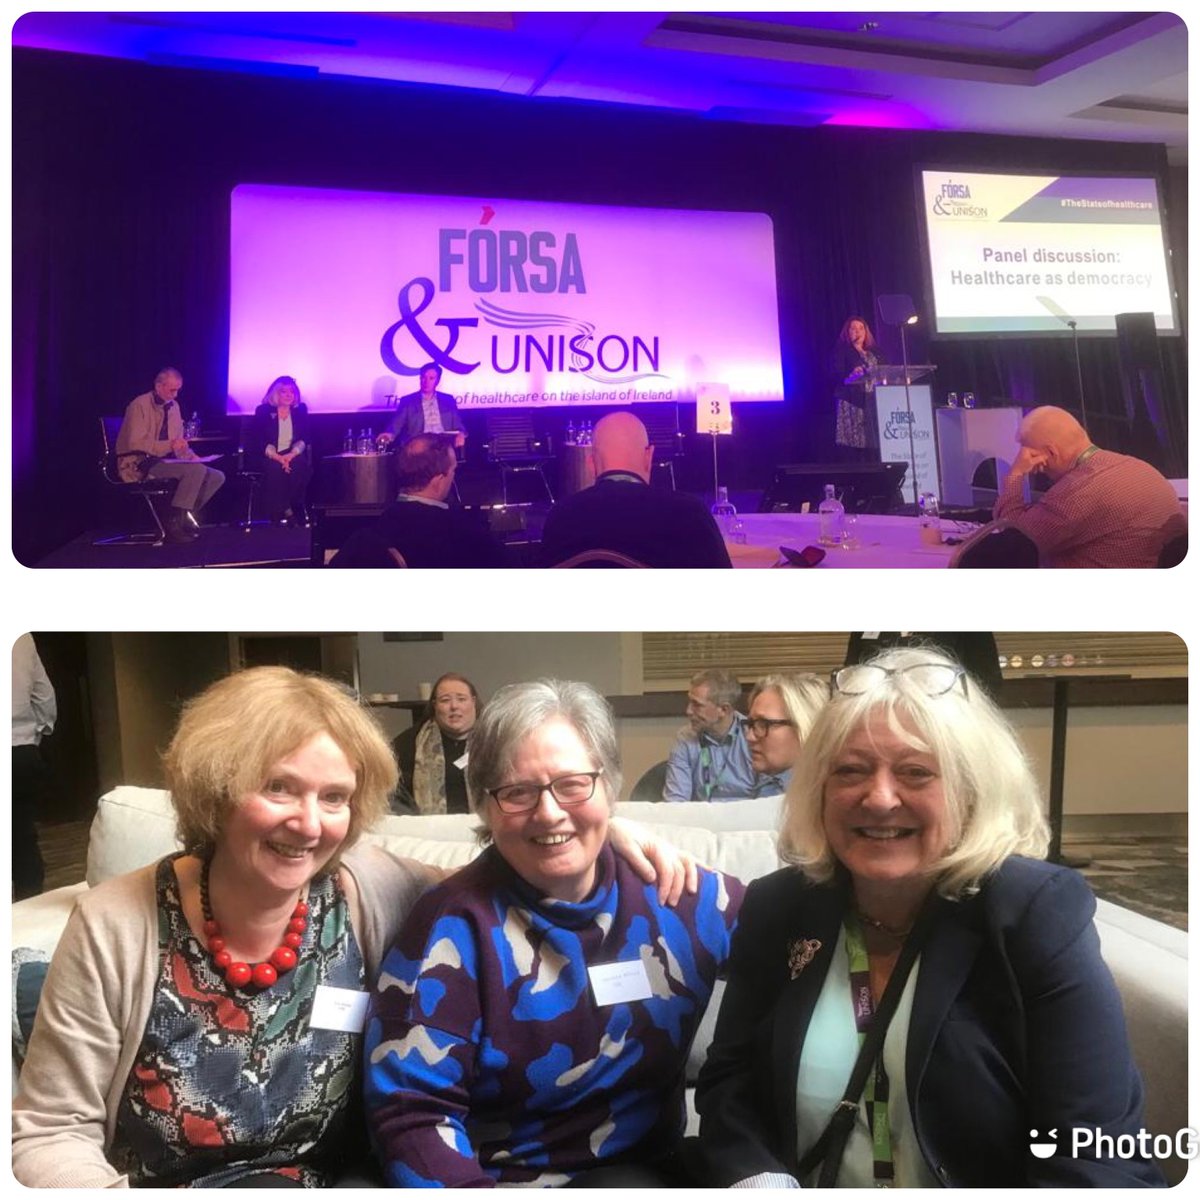 Great to be at @UNISONNI @forsa_union_ie conference on #TheStateofhealthcare Prof. Kathleen Lynch's points about hyper-individualisation & recasting citizens as customers & clients, resonated deeply. It's what #NewScript is committed to challenging in the mental health model.